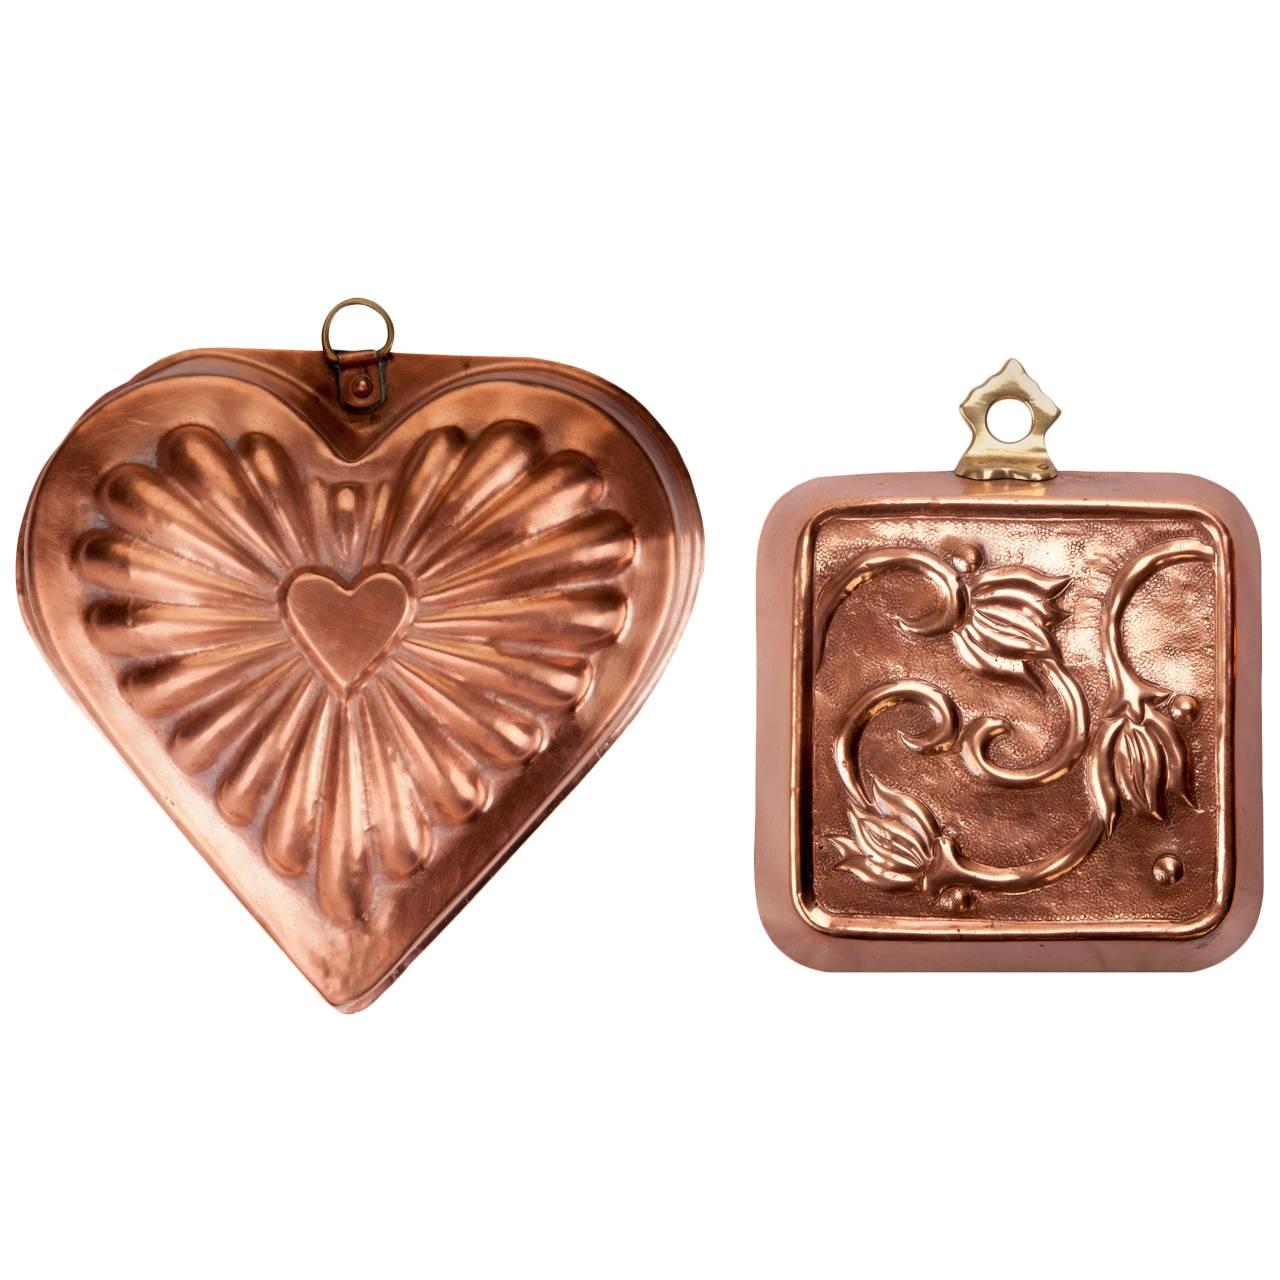 Antique Copper Heart and Flower Molds